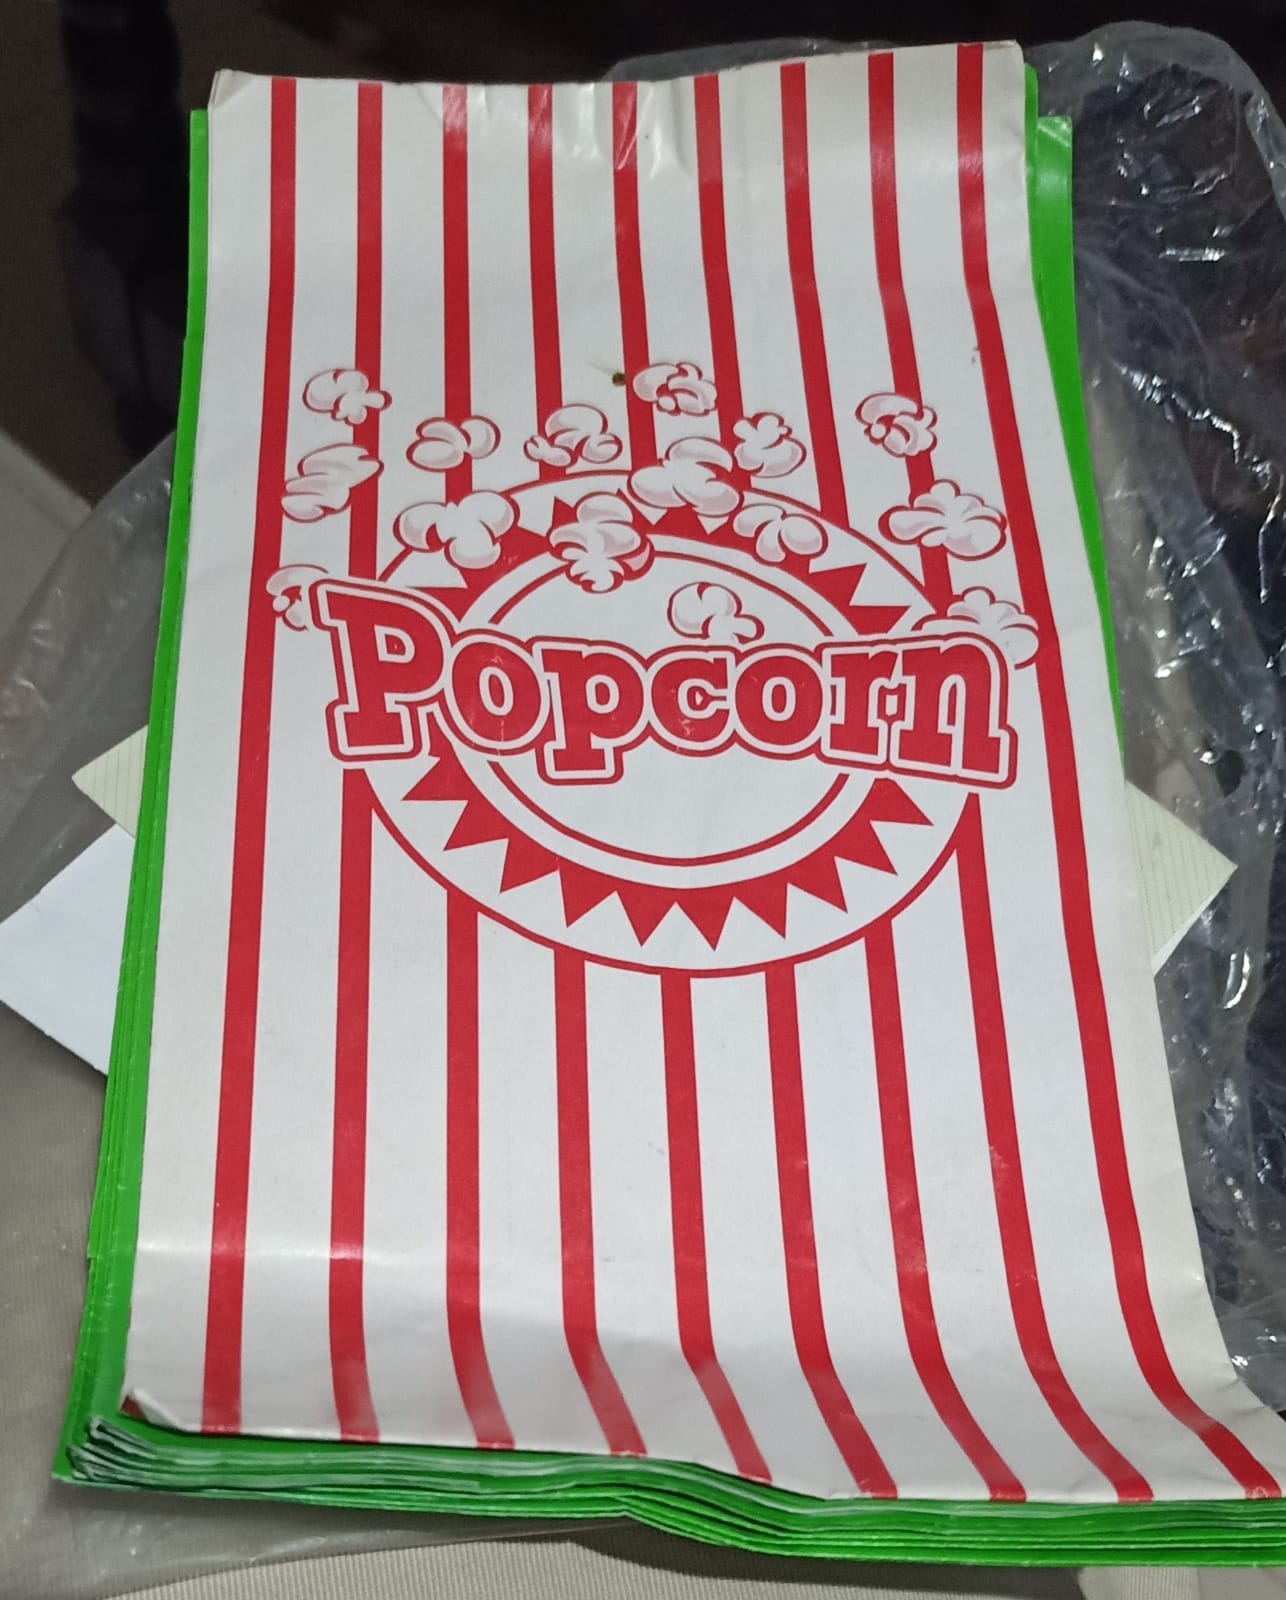 Popcorn Bags (10pcs)) Popcorn Bags Red and White Striped Pop Corn Flat  Bottom Bags for Family Movie Night, Gift, Cinema Theater, Party or Game  Supplies on OnBuy